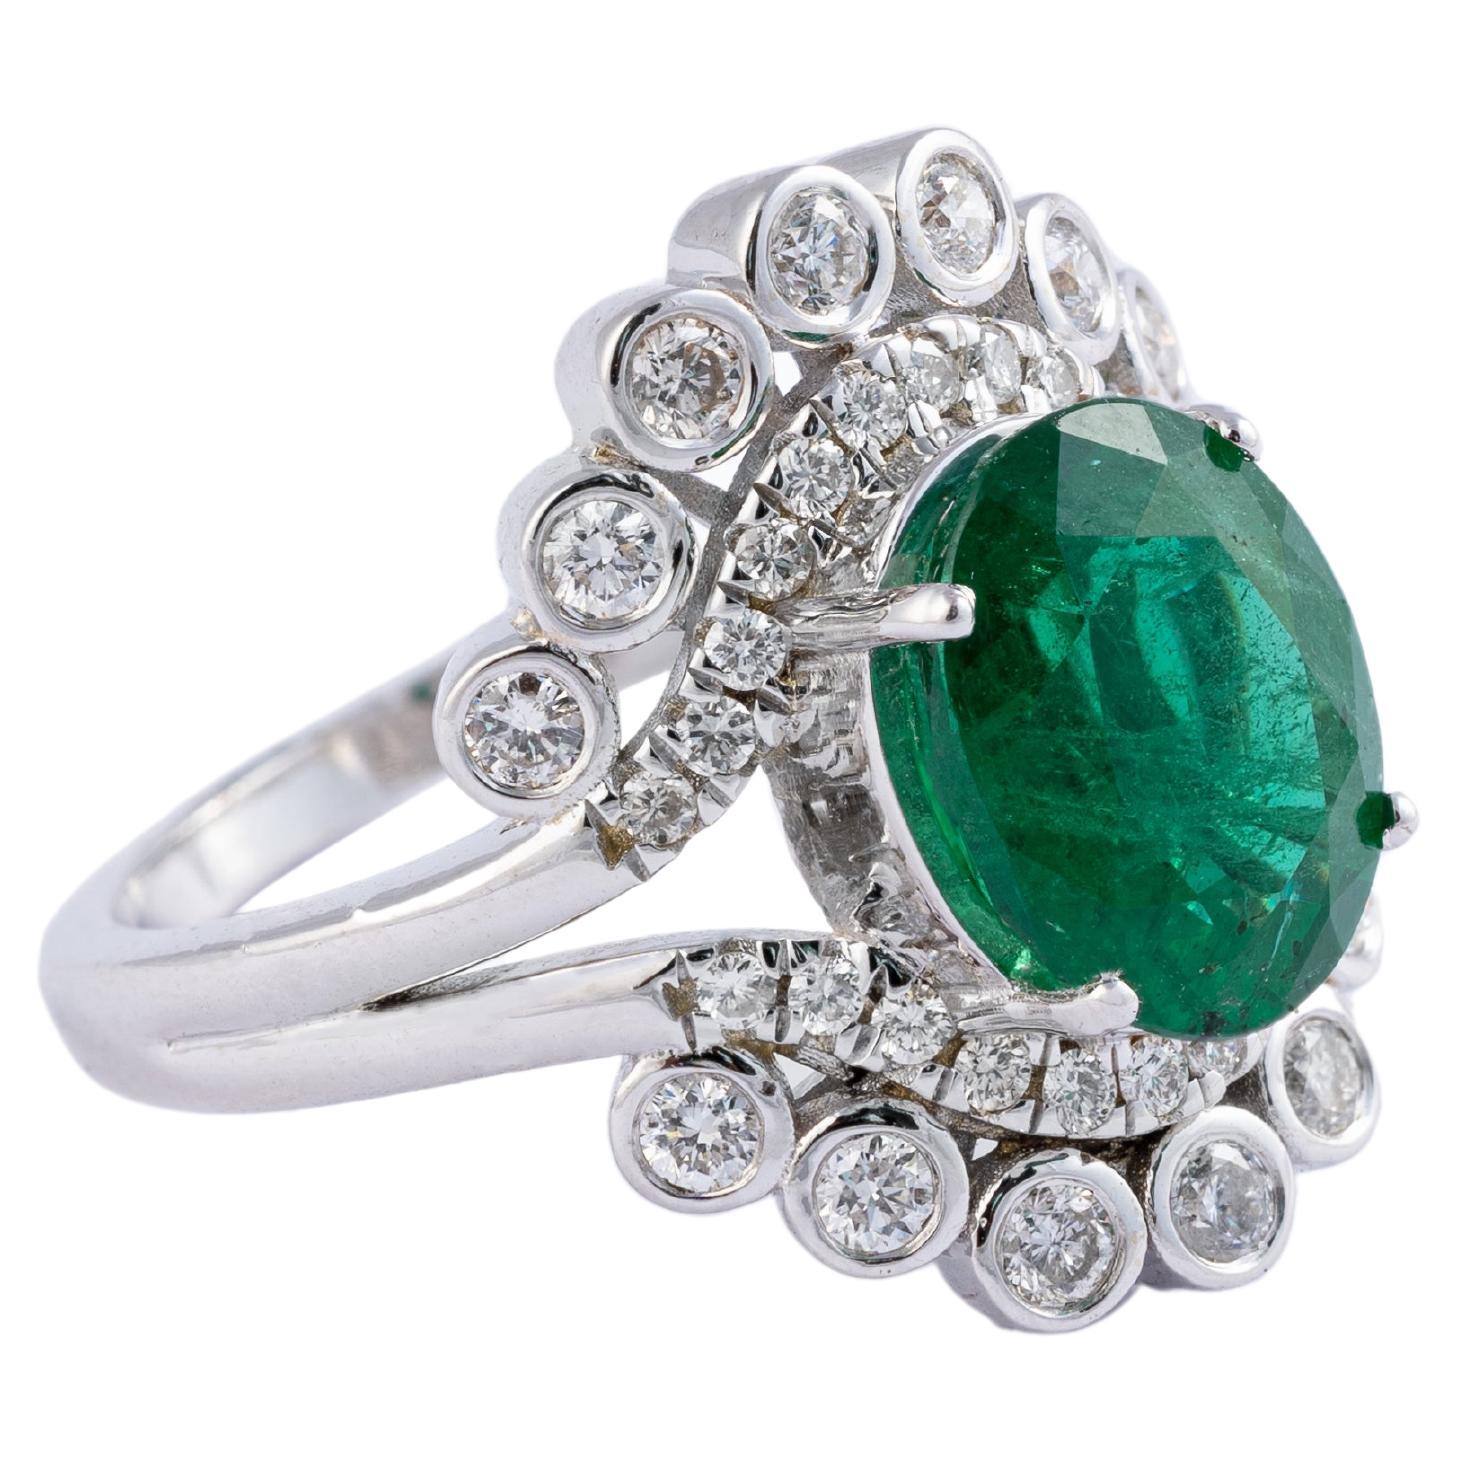 2.96cts Zambian Emerald Ring with 0.65cts Diamonds and 14k Gold For Sale